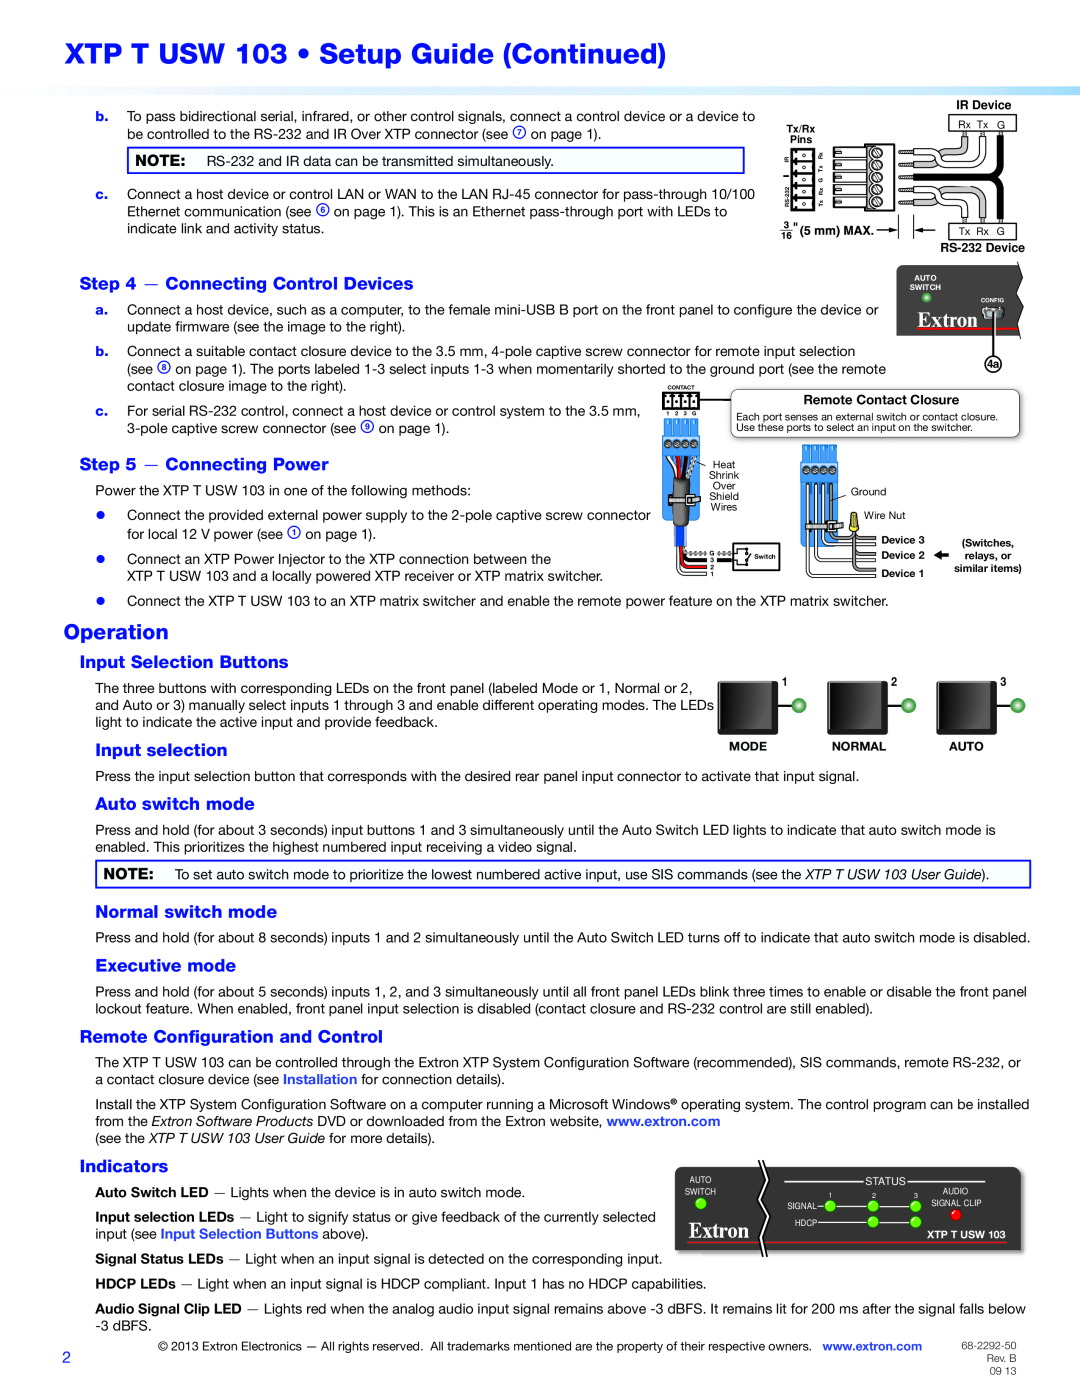 Extron electronic Operation, XTP T USW 103 Setup Guide Continued, Connecting Control Devices, Connecting Power 